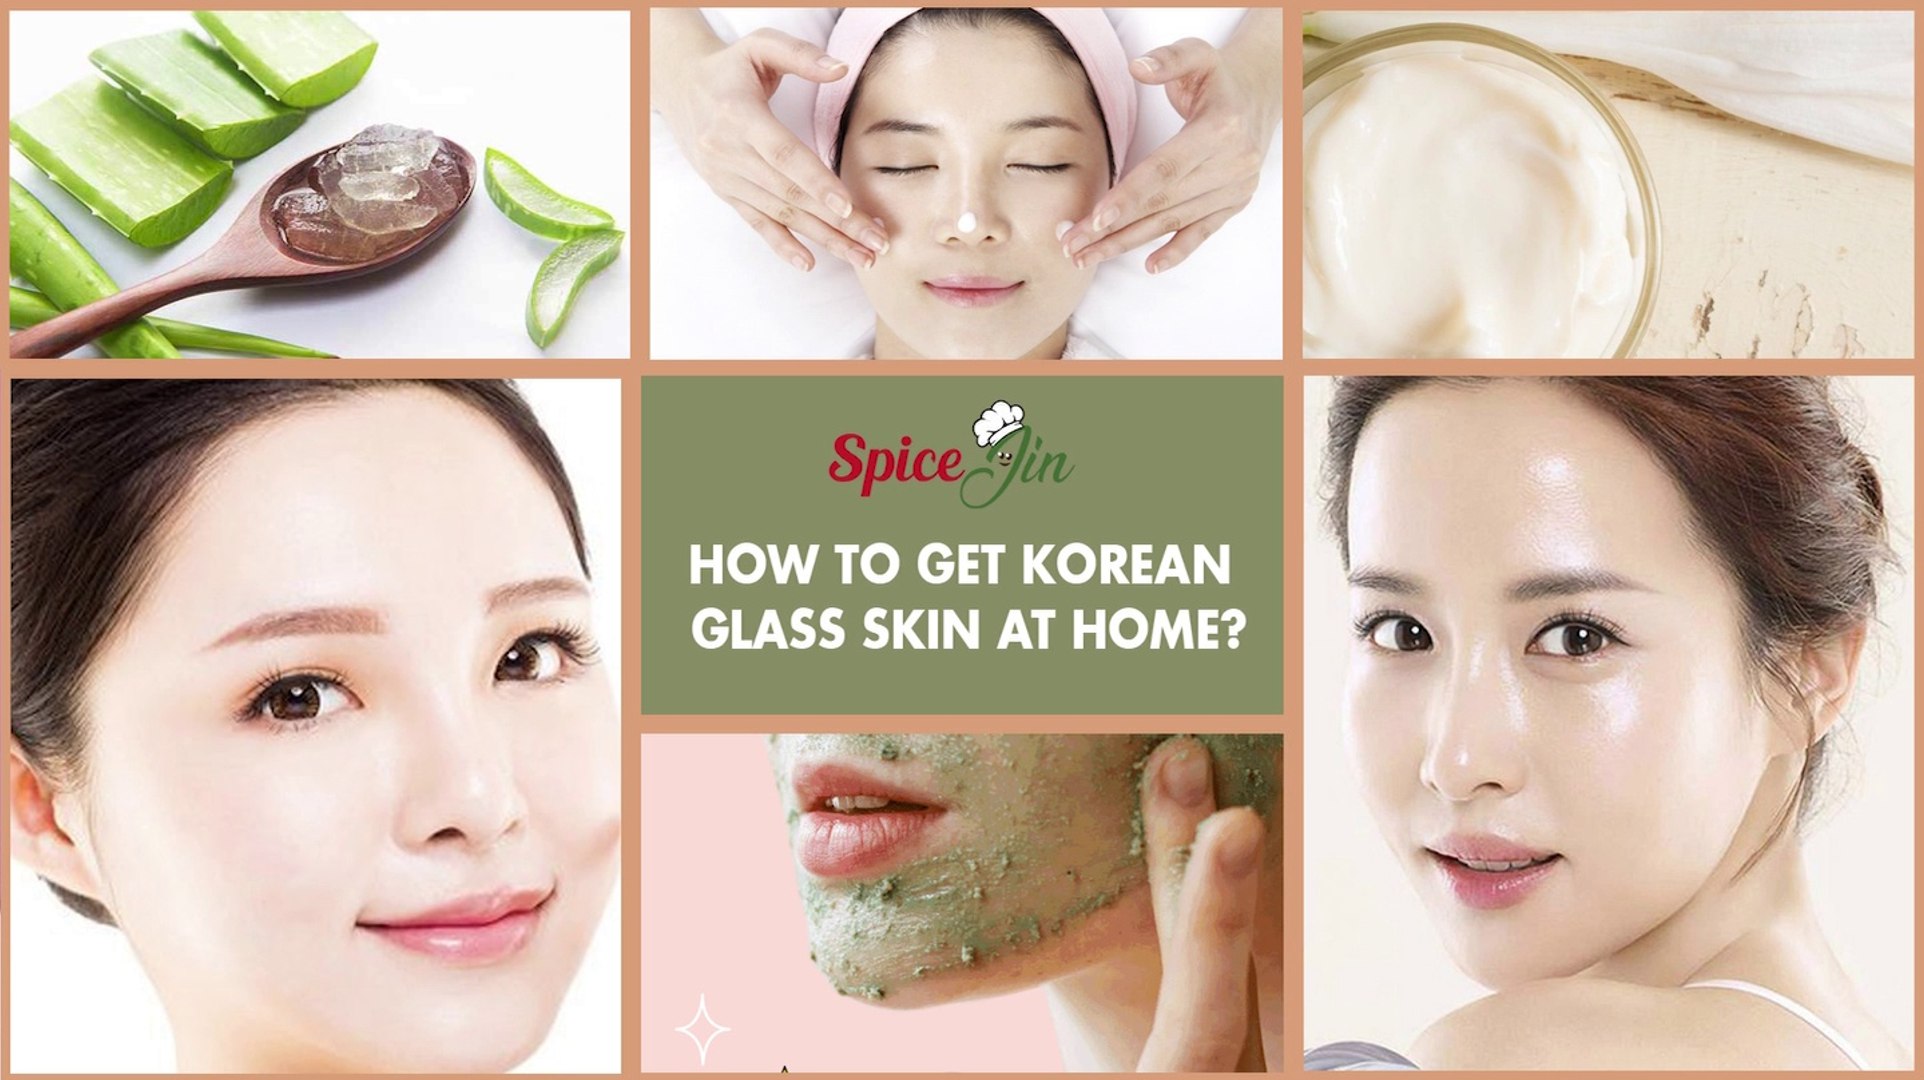 What Is Glass Skin and How Can You Get It?